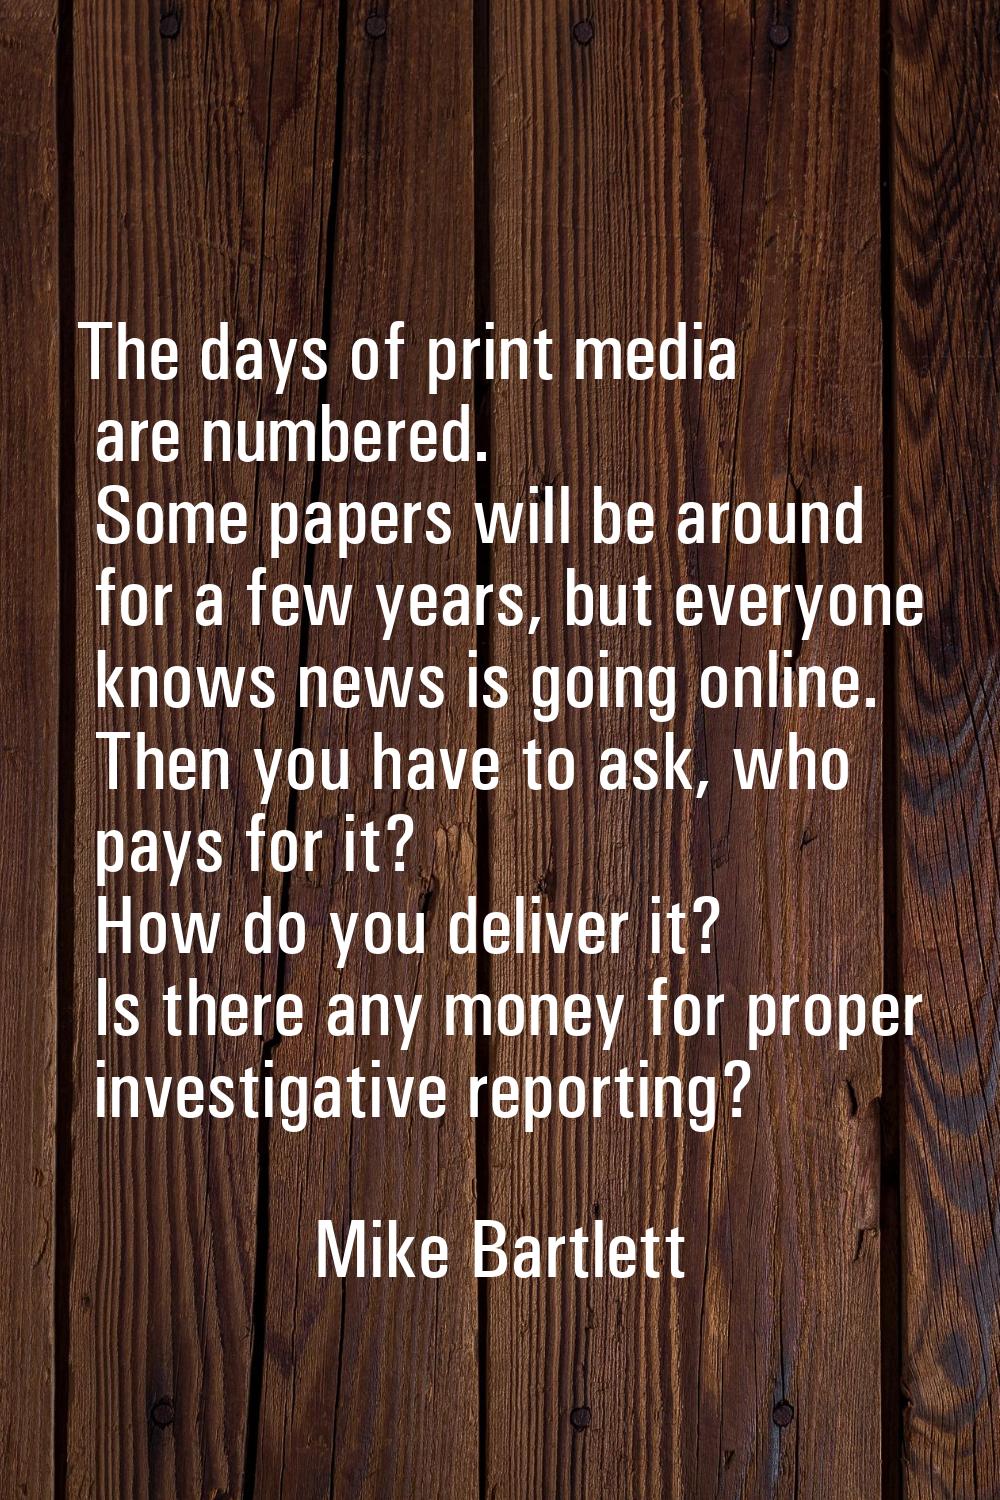 The days of print media are numbered. Some papers will be around for a few years, but everyone know